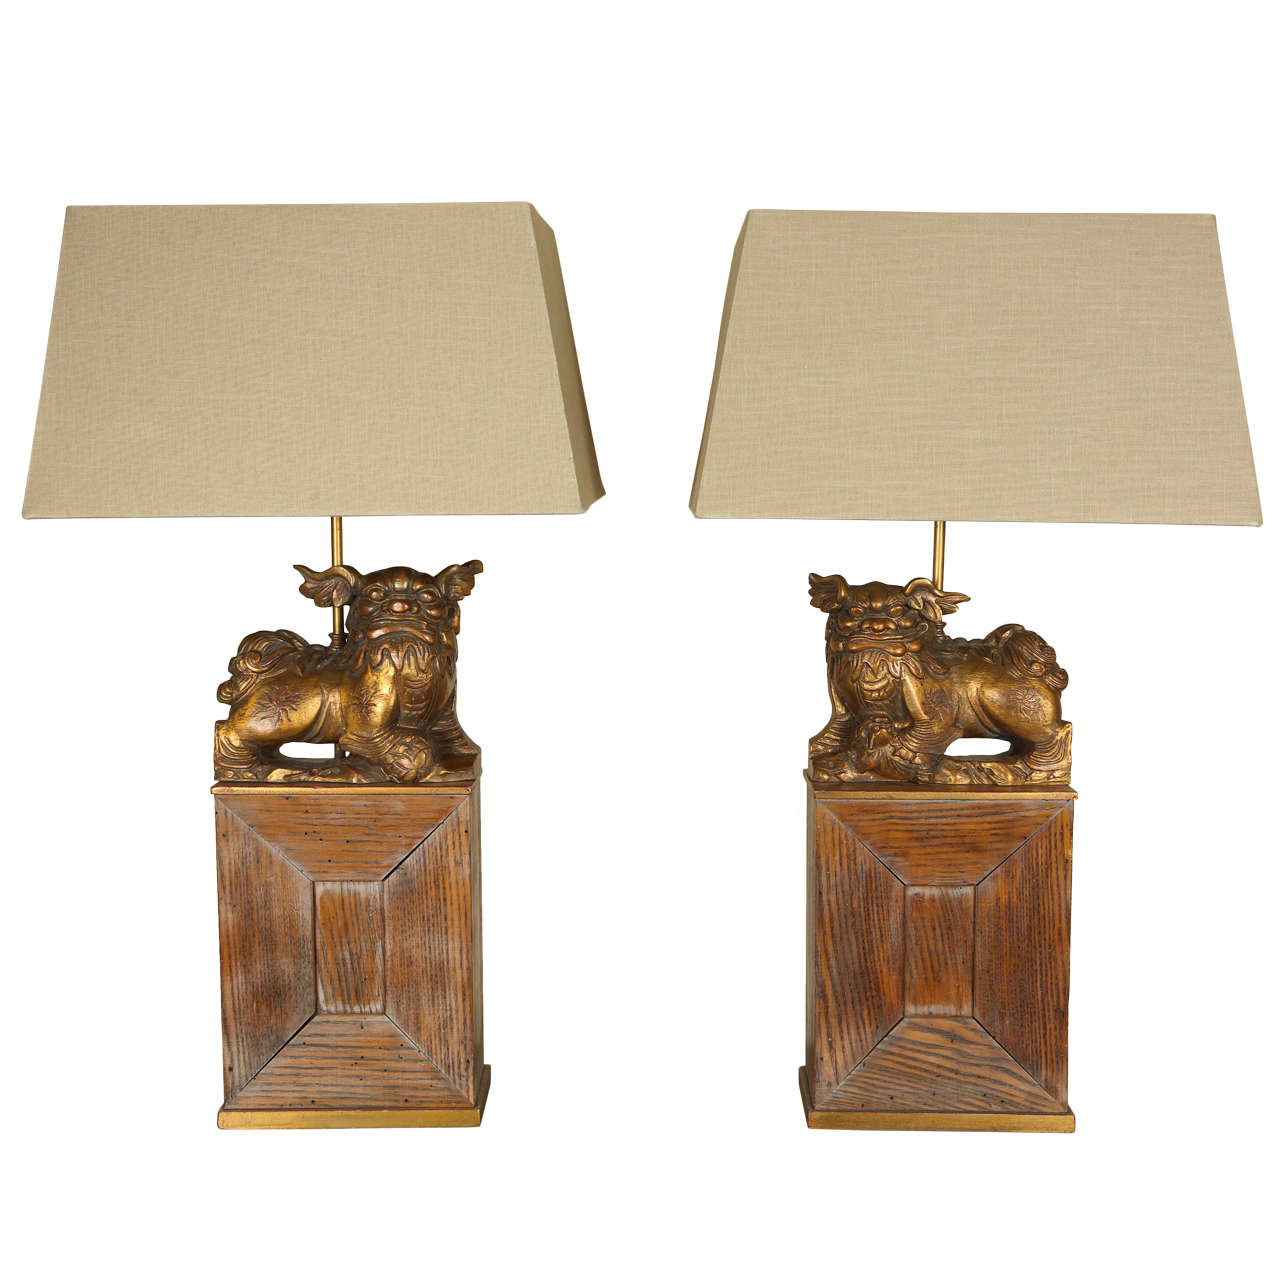 Pair of Stunning Lamps with Foo Dogs by James Mont